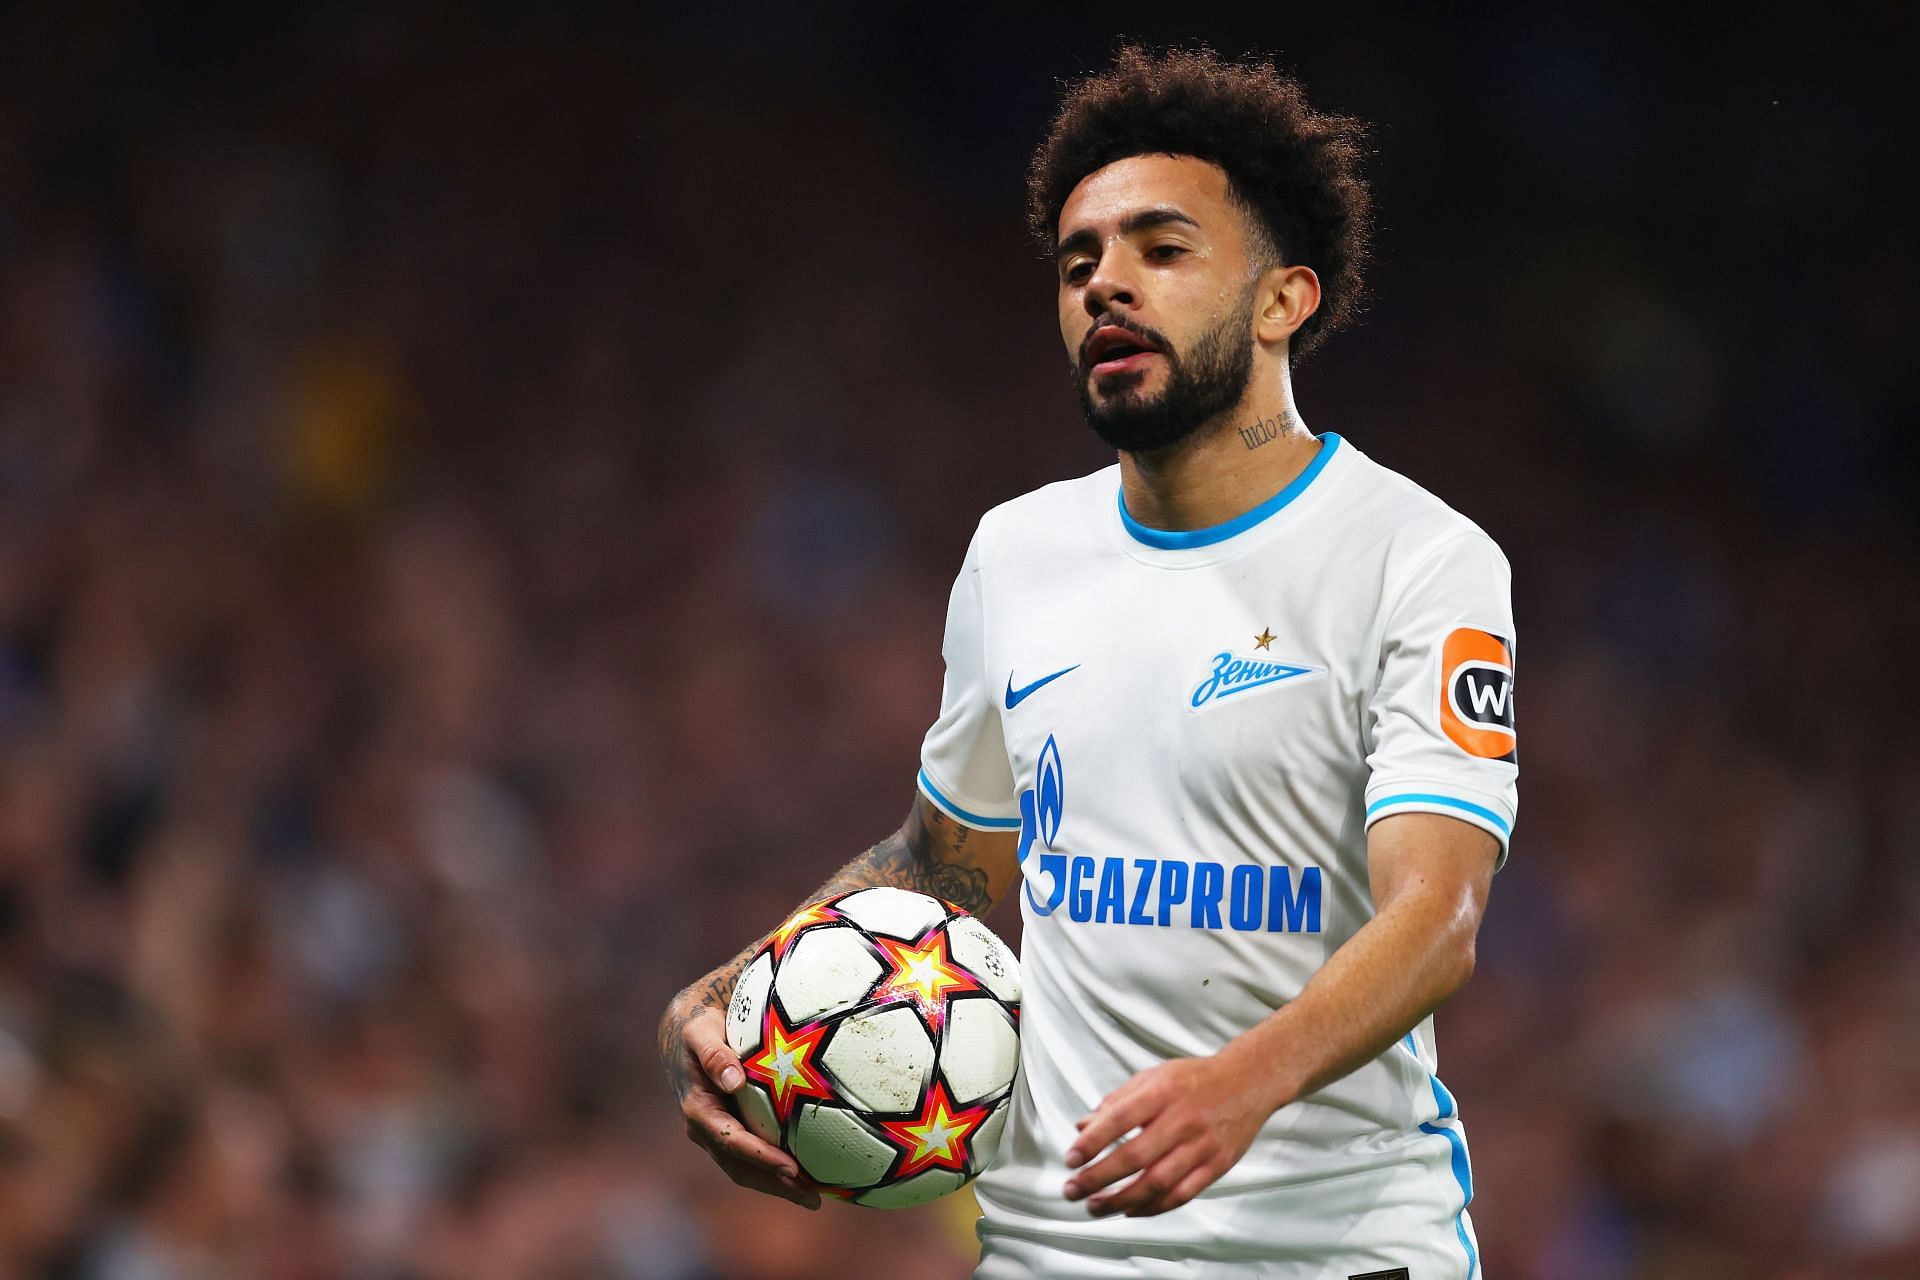 Zenit St. Petersburg and Red Star Belgradeface off on Sunday